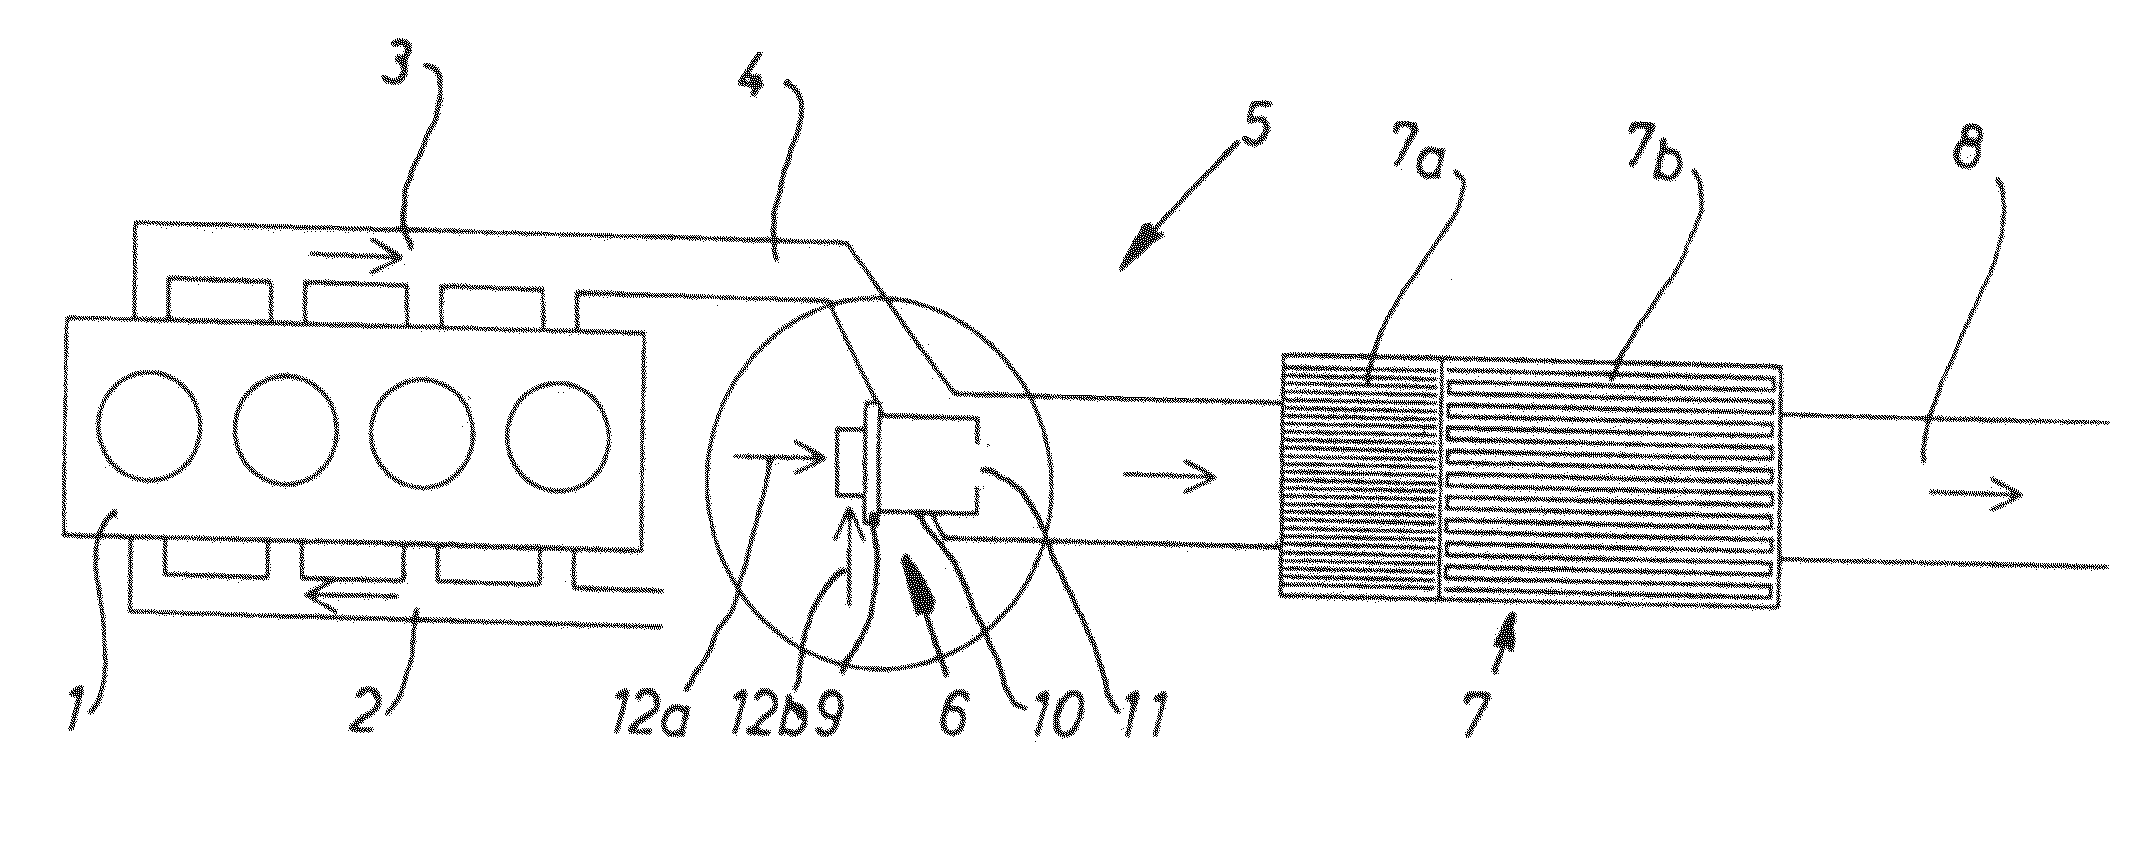 Exhaust-gas after-treatment system for an auto-ignition internal combustion engine